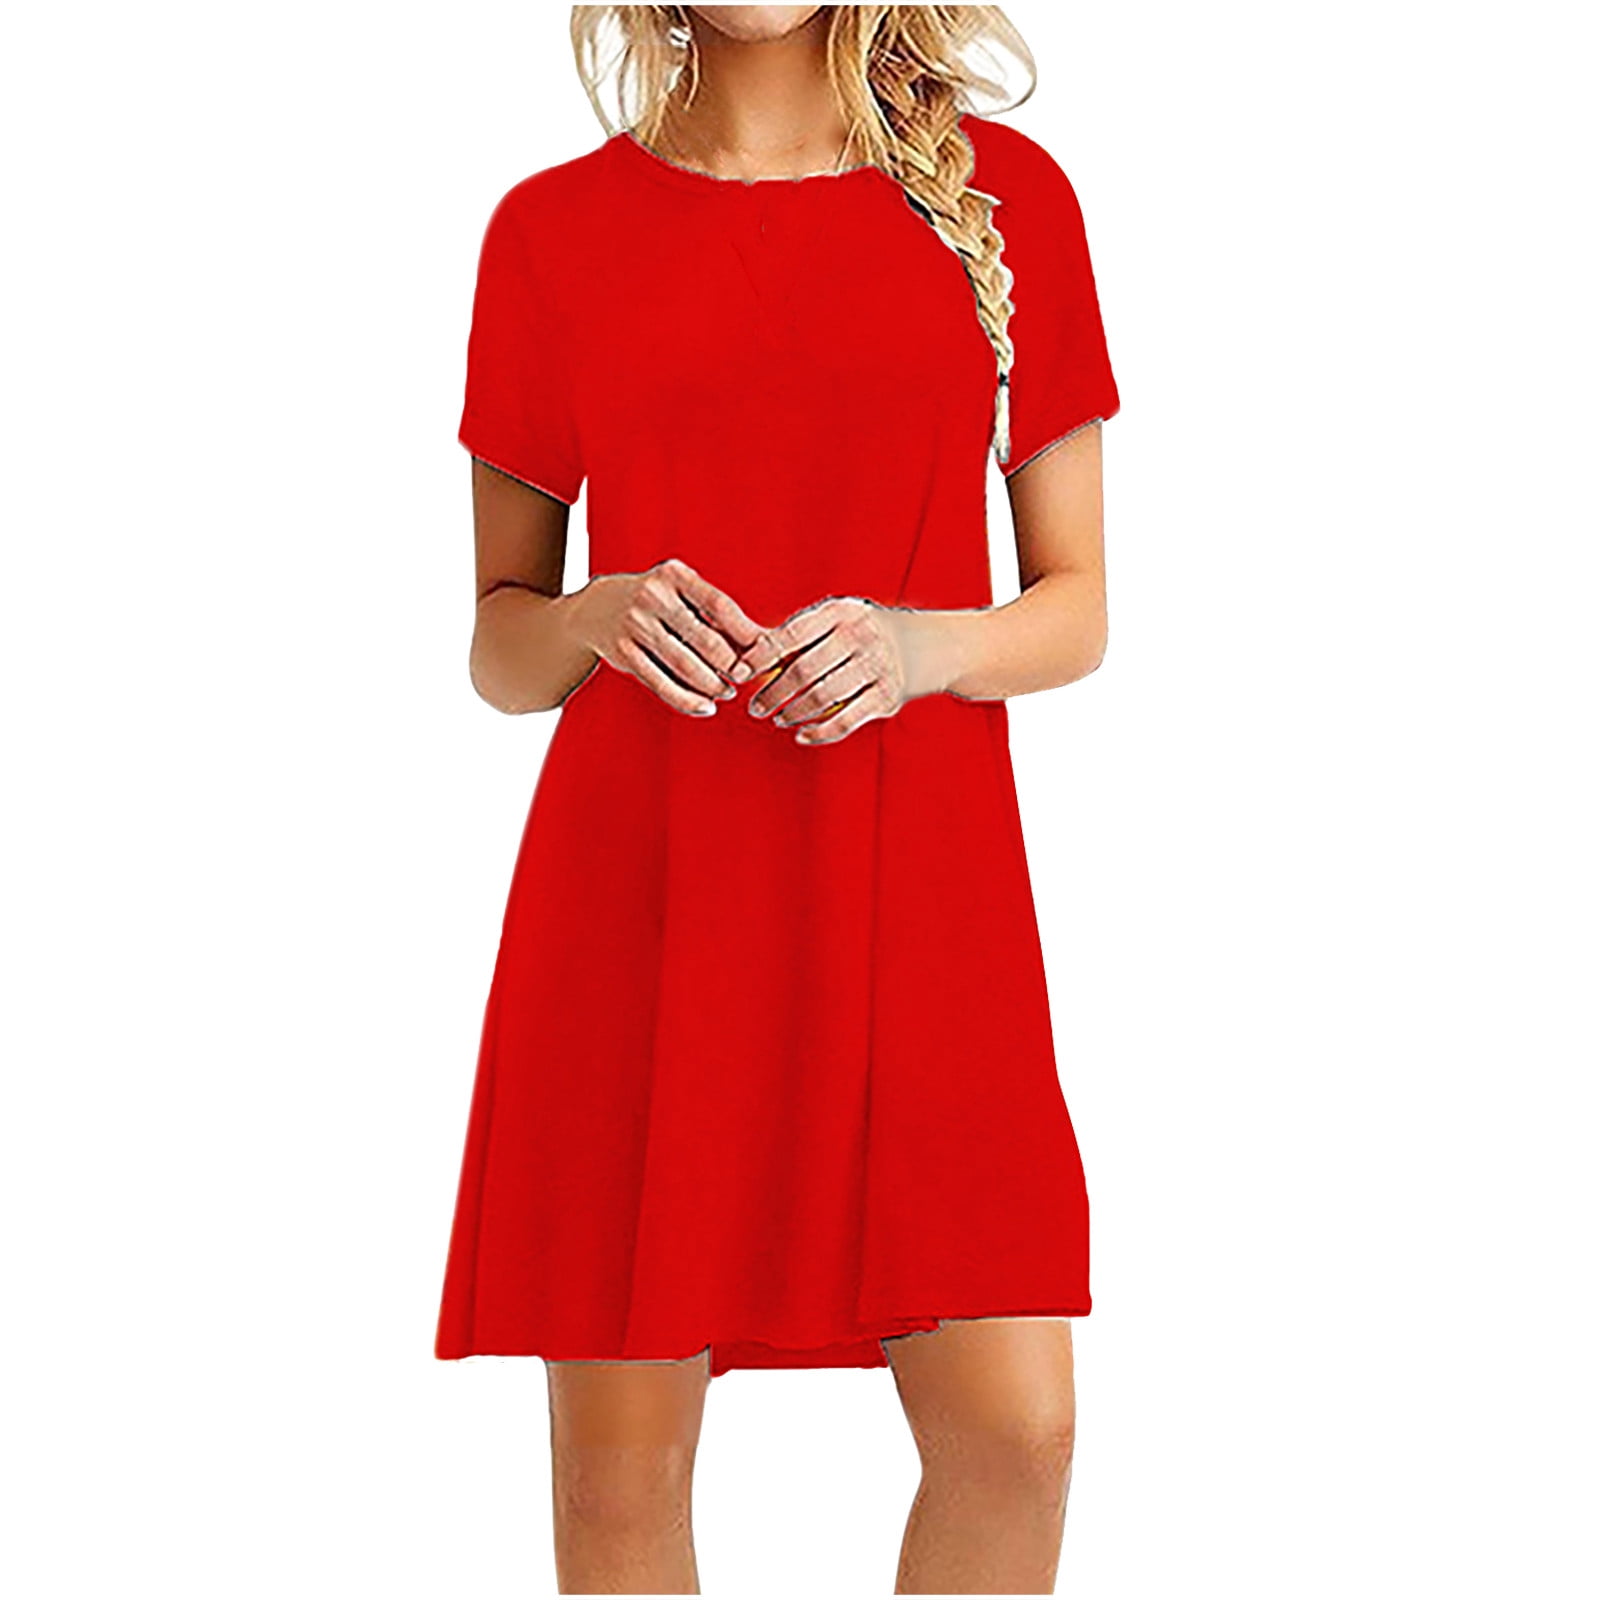 Willow S Womens Valentines Day Fashion O-Neck Ladies Solid Color Buttons Casual Mini Dress T-Shirts Tops Blouse 